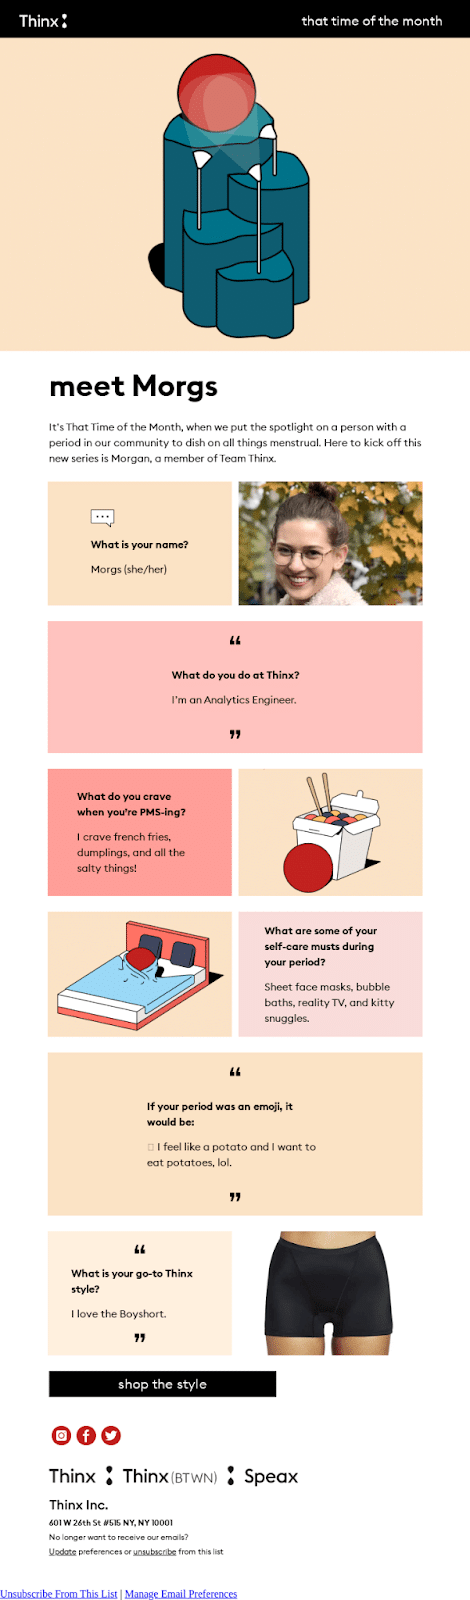 An example of a personal branding email from Thinx